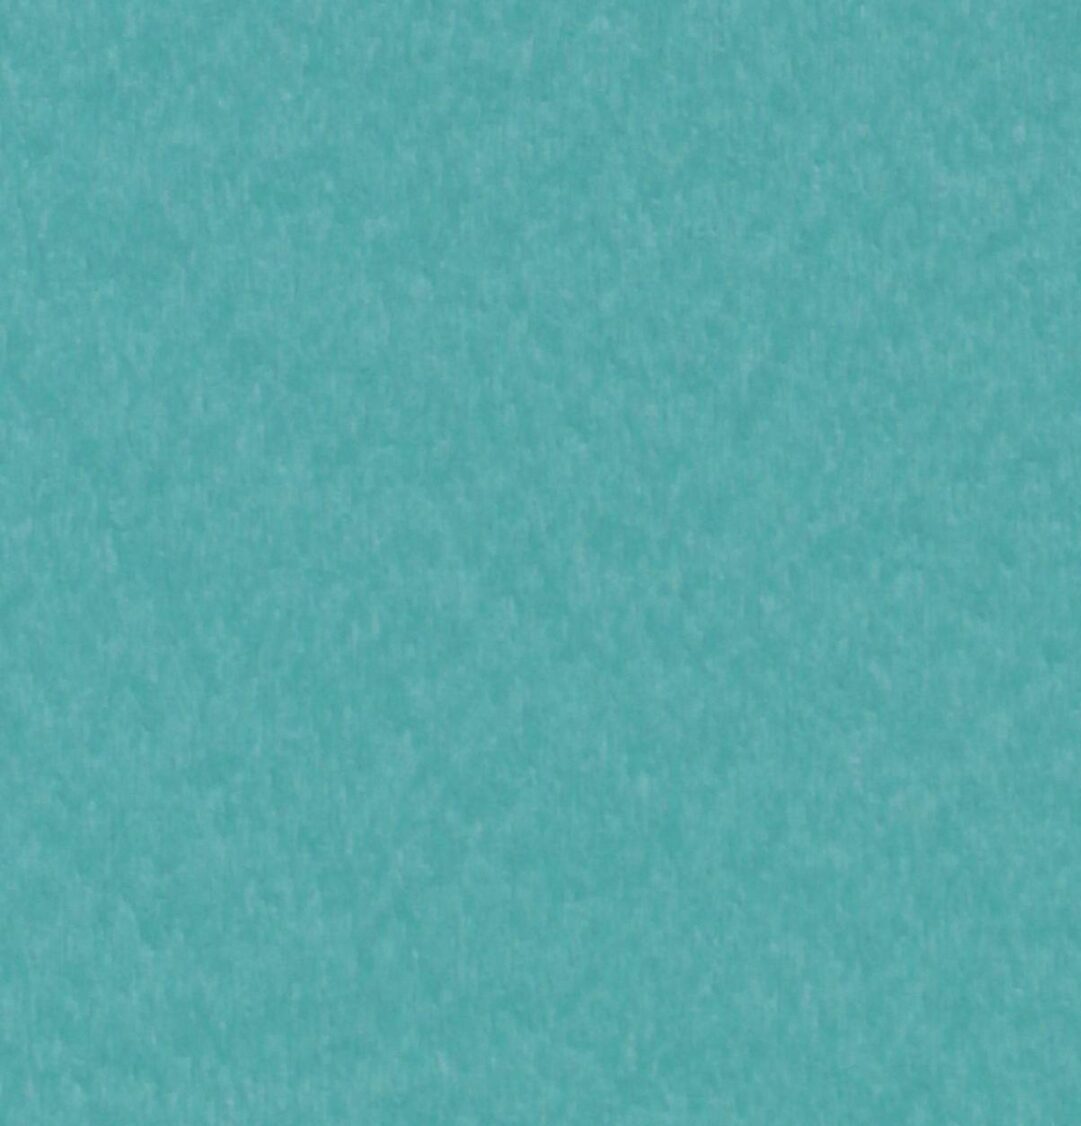 Standard Finish Turquoise Swatch